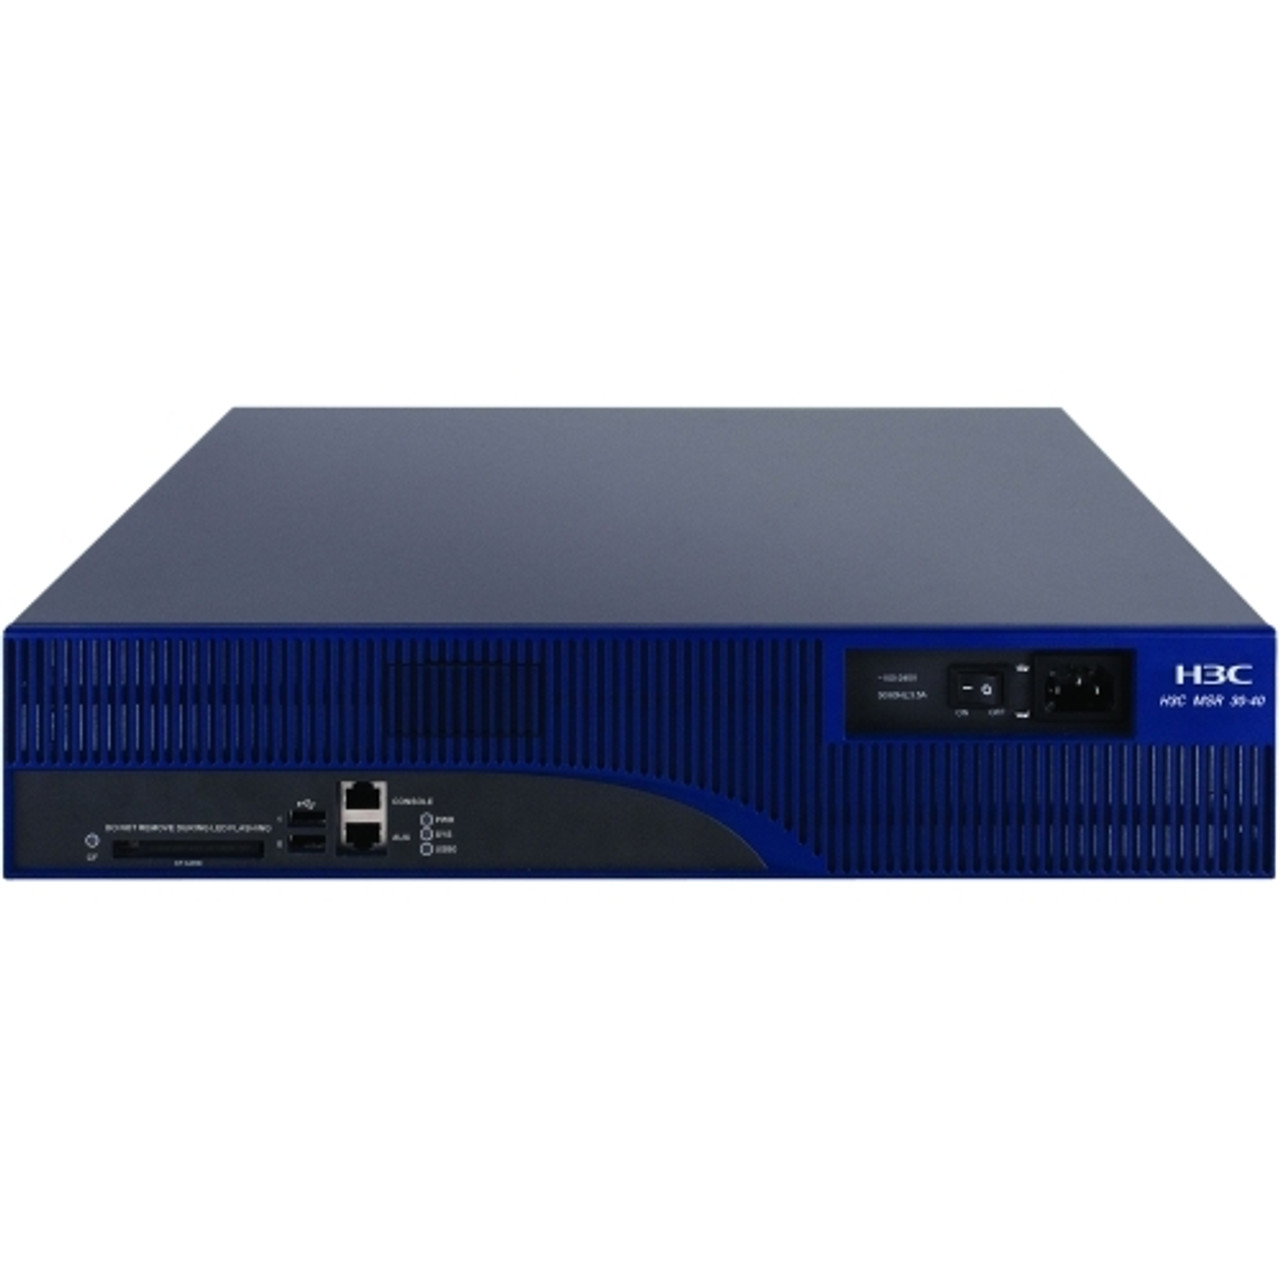 JF803A HP A-MSR30-40 PoE Multi Service Router (Refurbished)